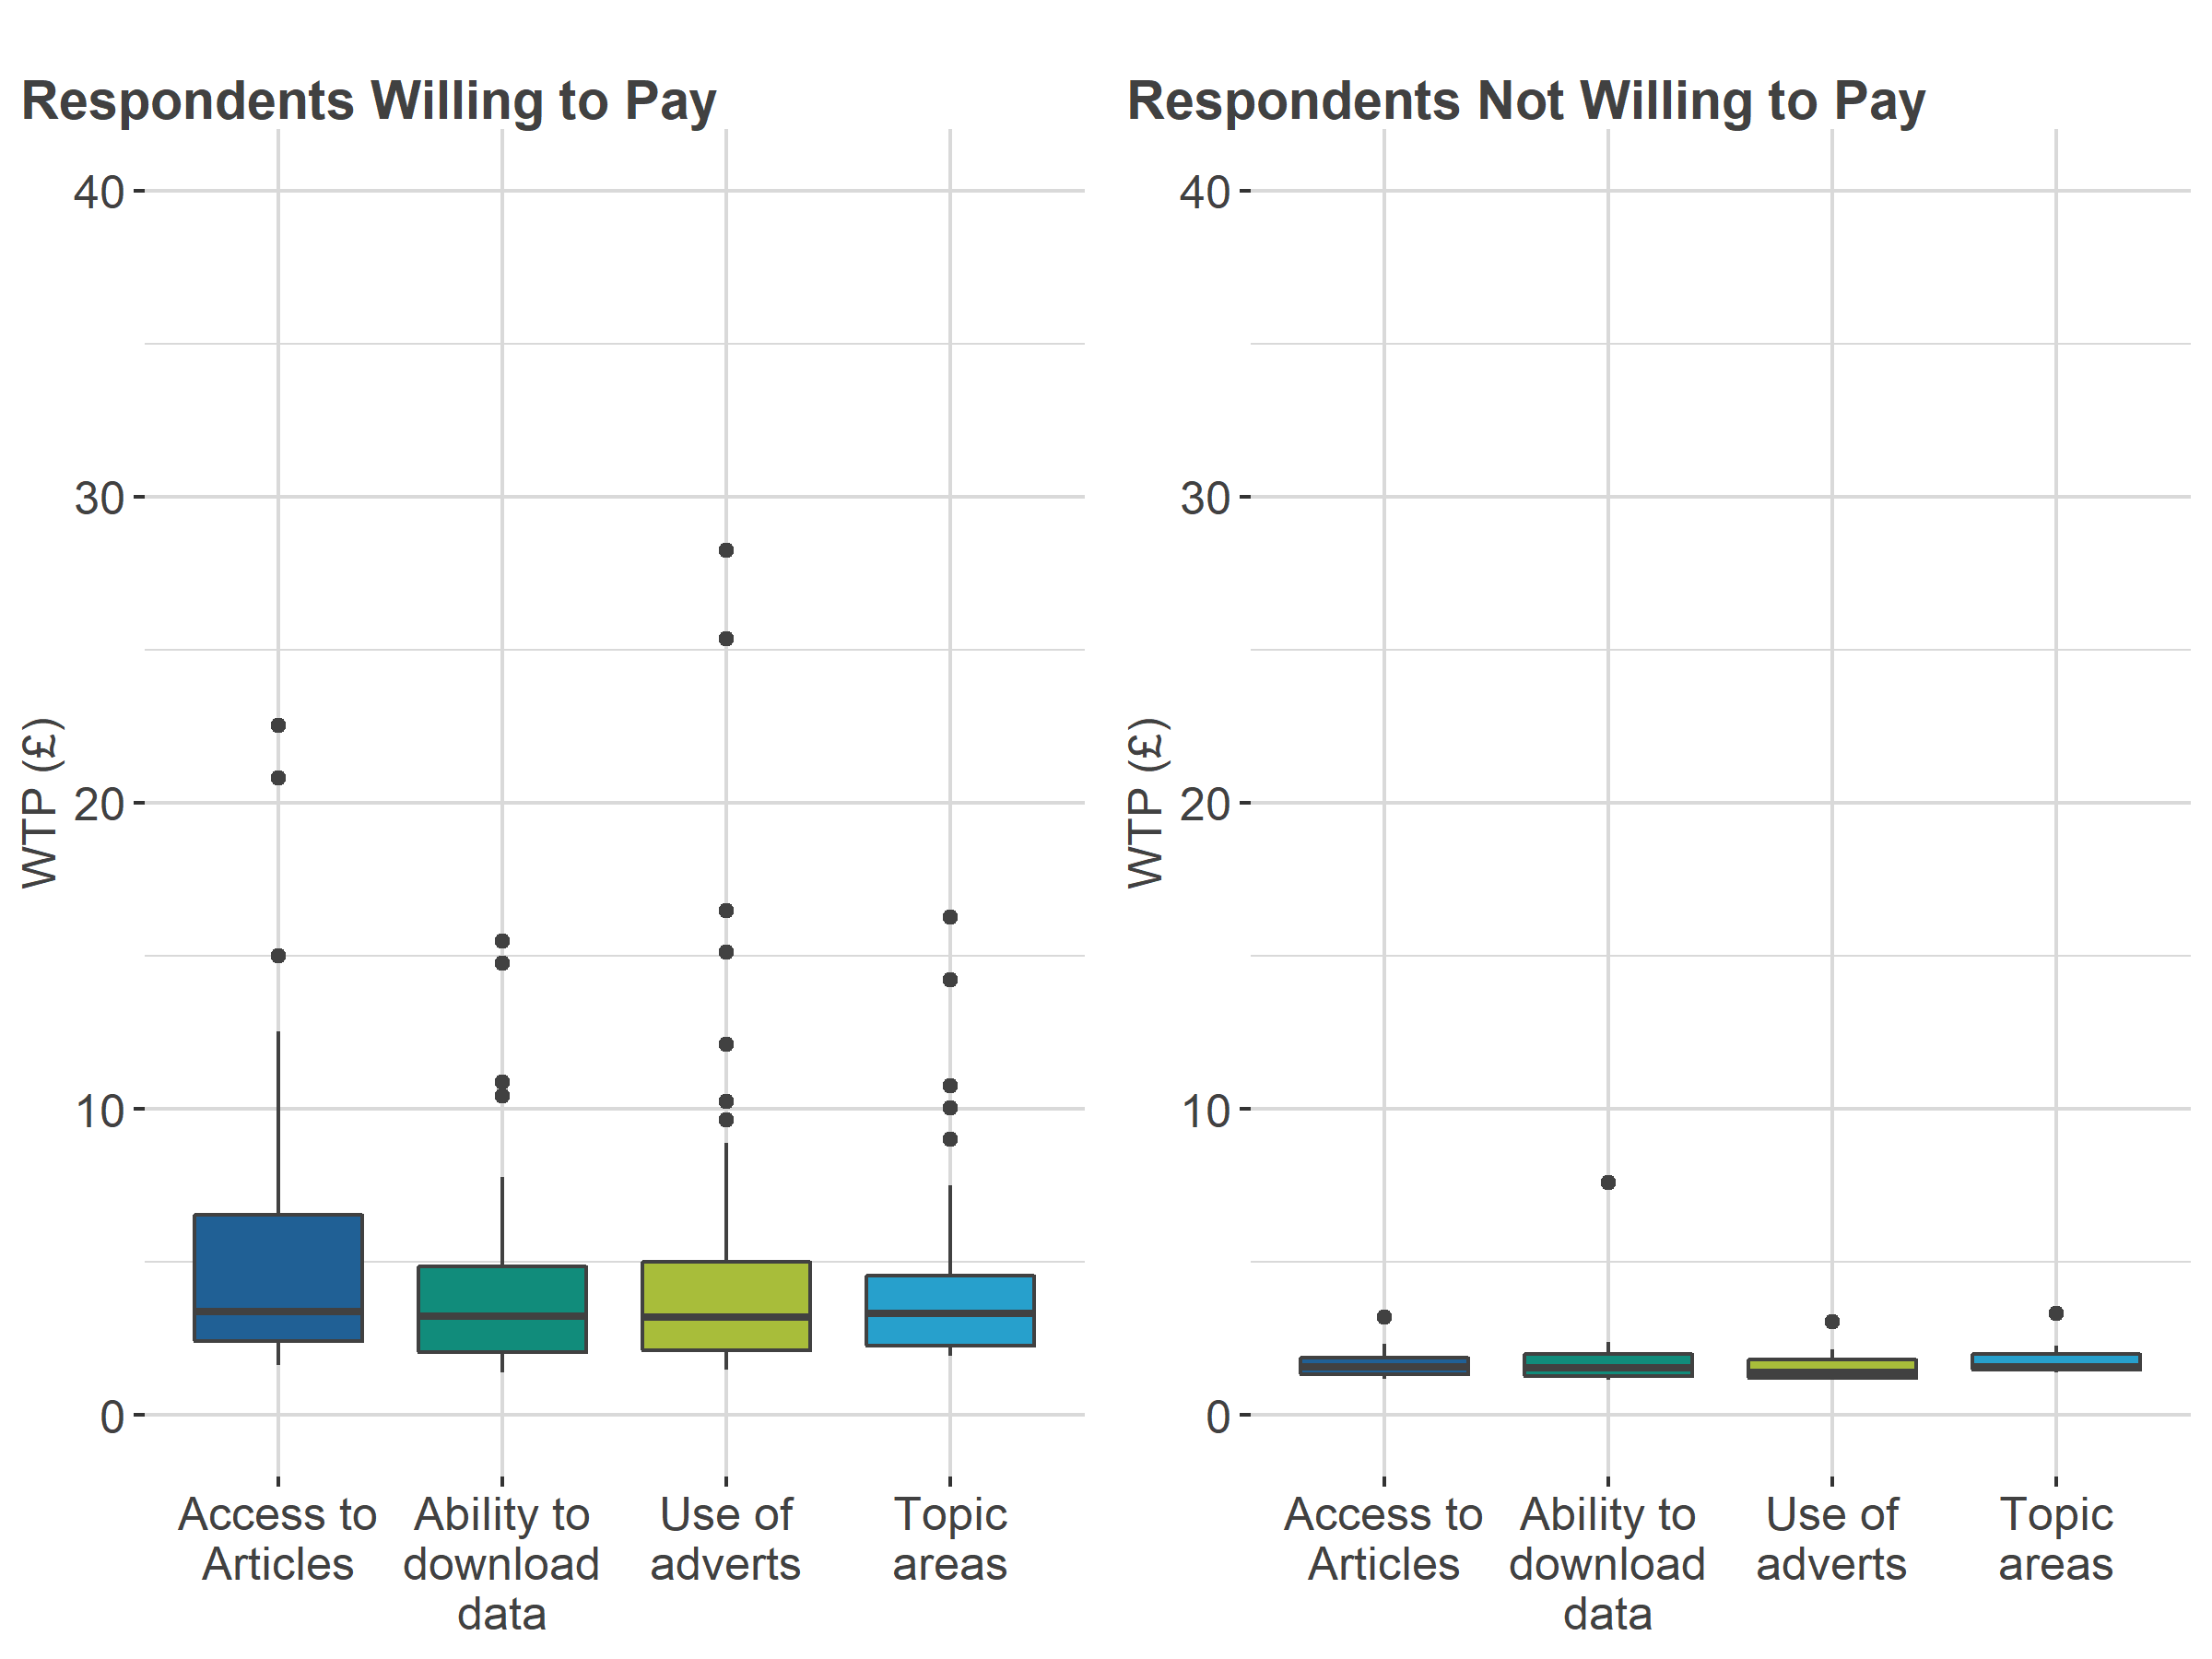 Box plot of expert data users’ willingness to pay in pounds in Conjoint A.